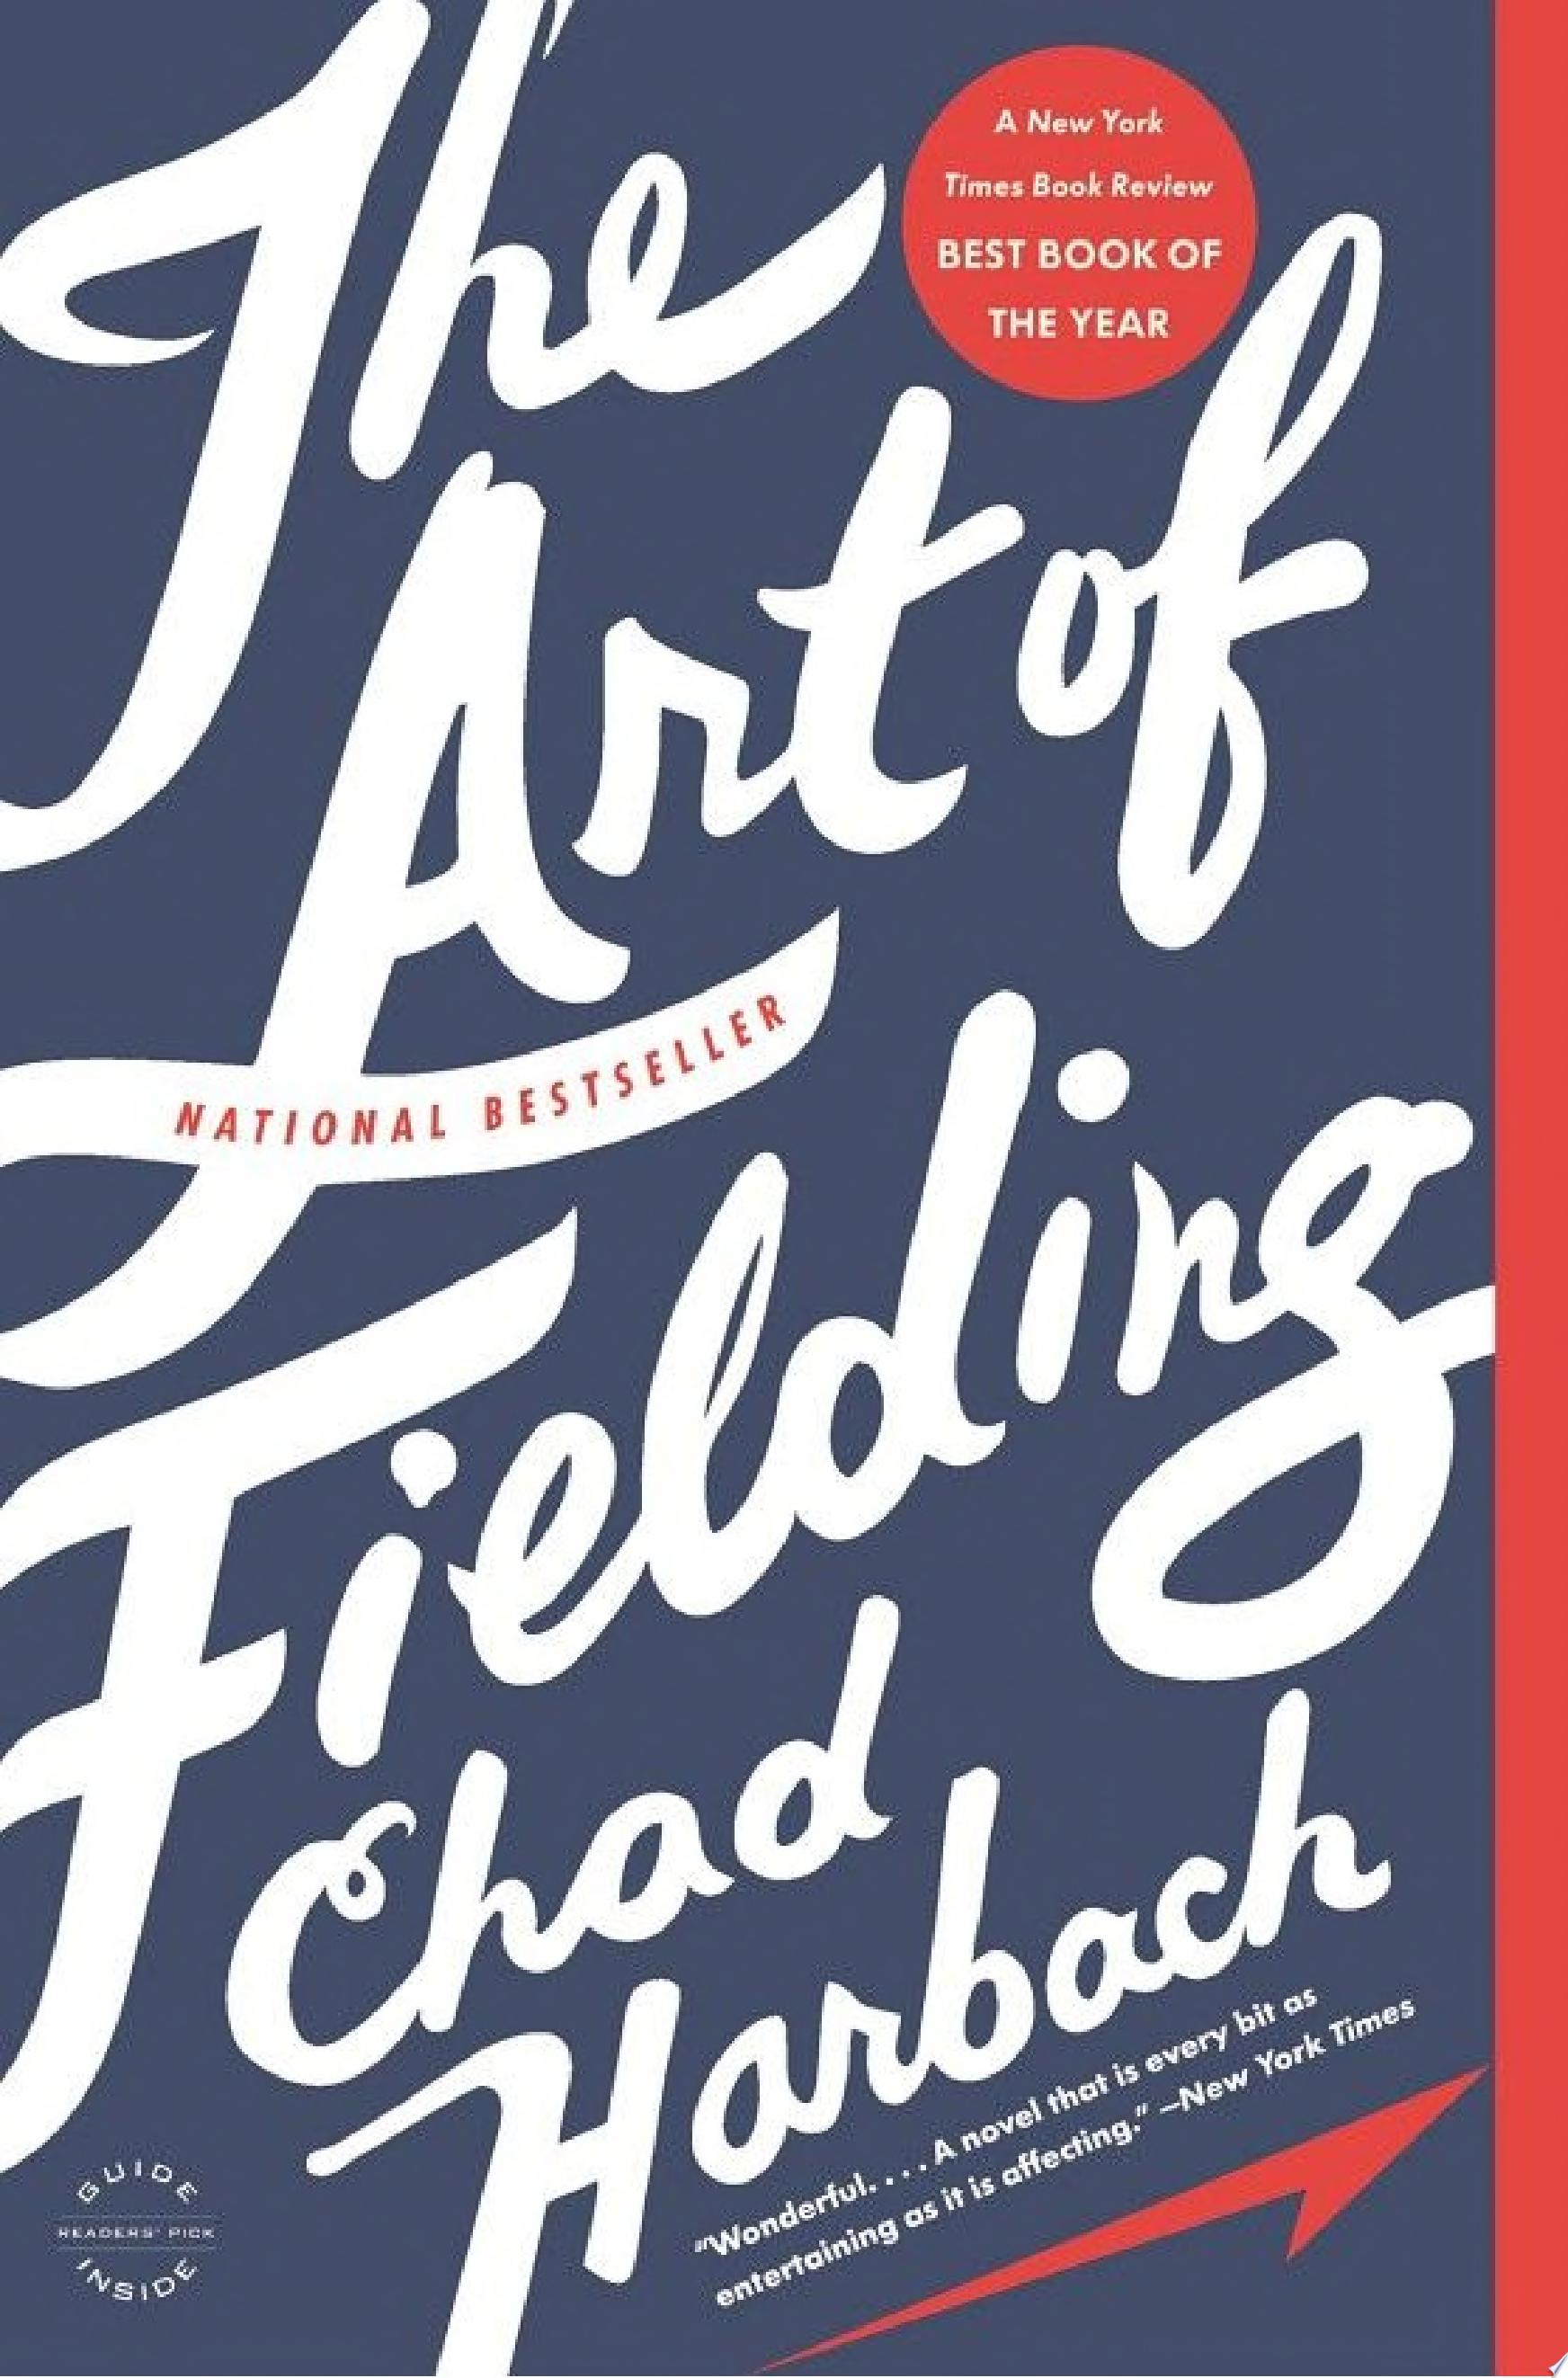 Image for "The Art of Fielding"